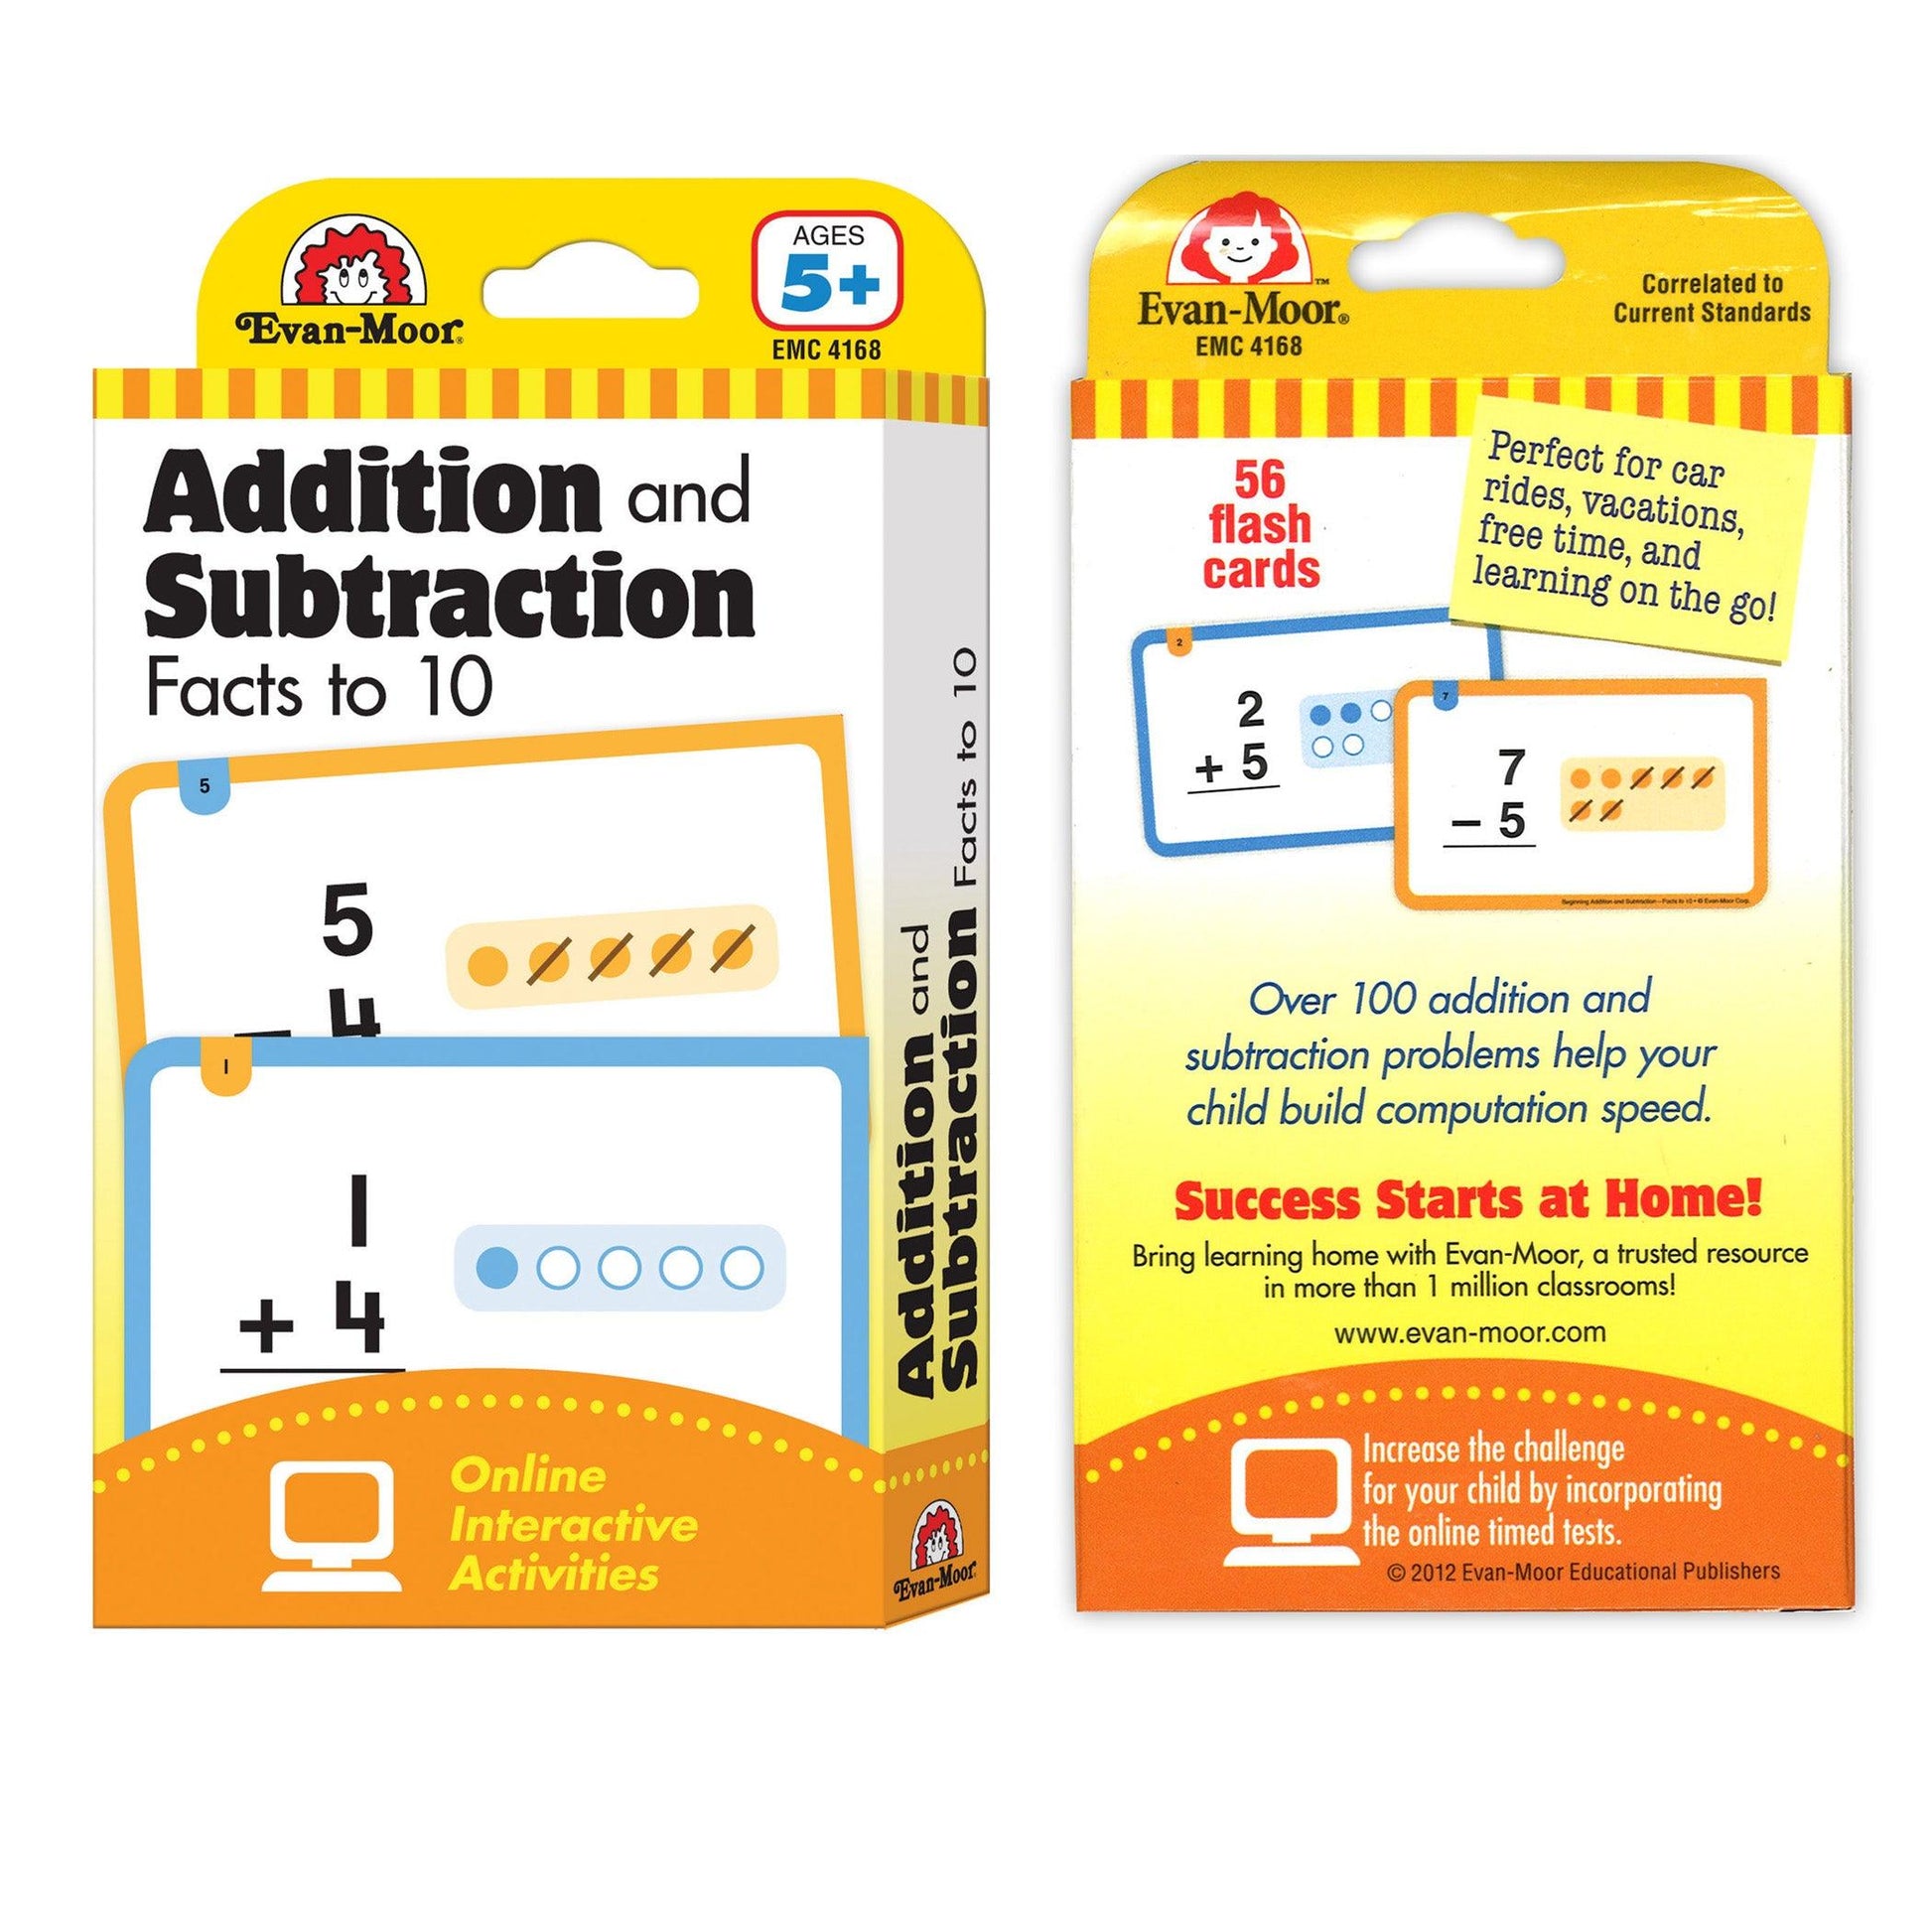 Learning Line: Addition and Subtraction Facts to 10, Grade 1+ (Age 5+) - 56 Flashcards Per Pack, 6 Packs - Loomini